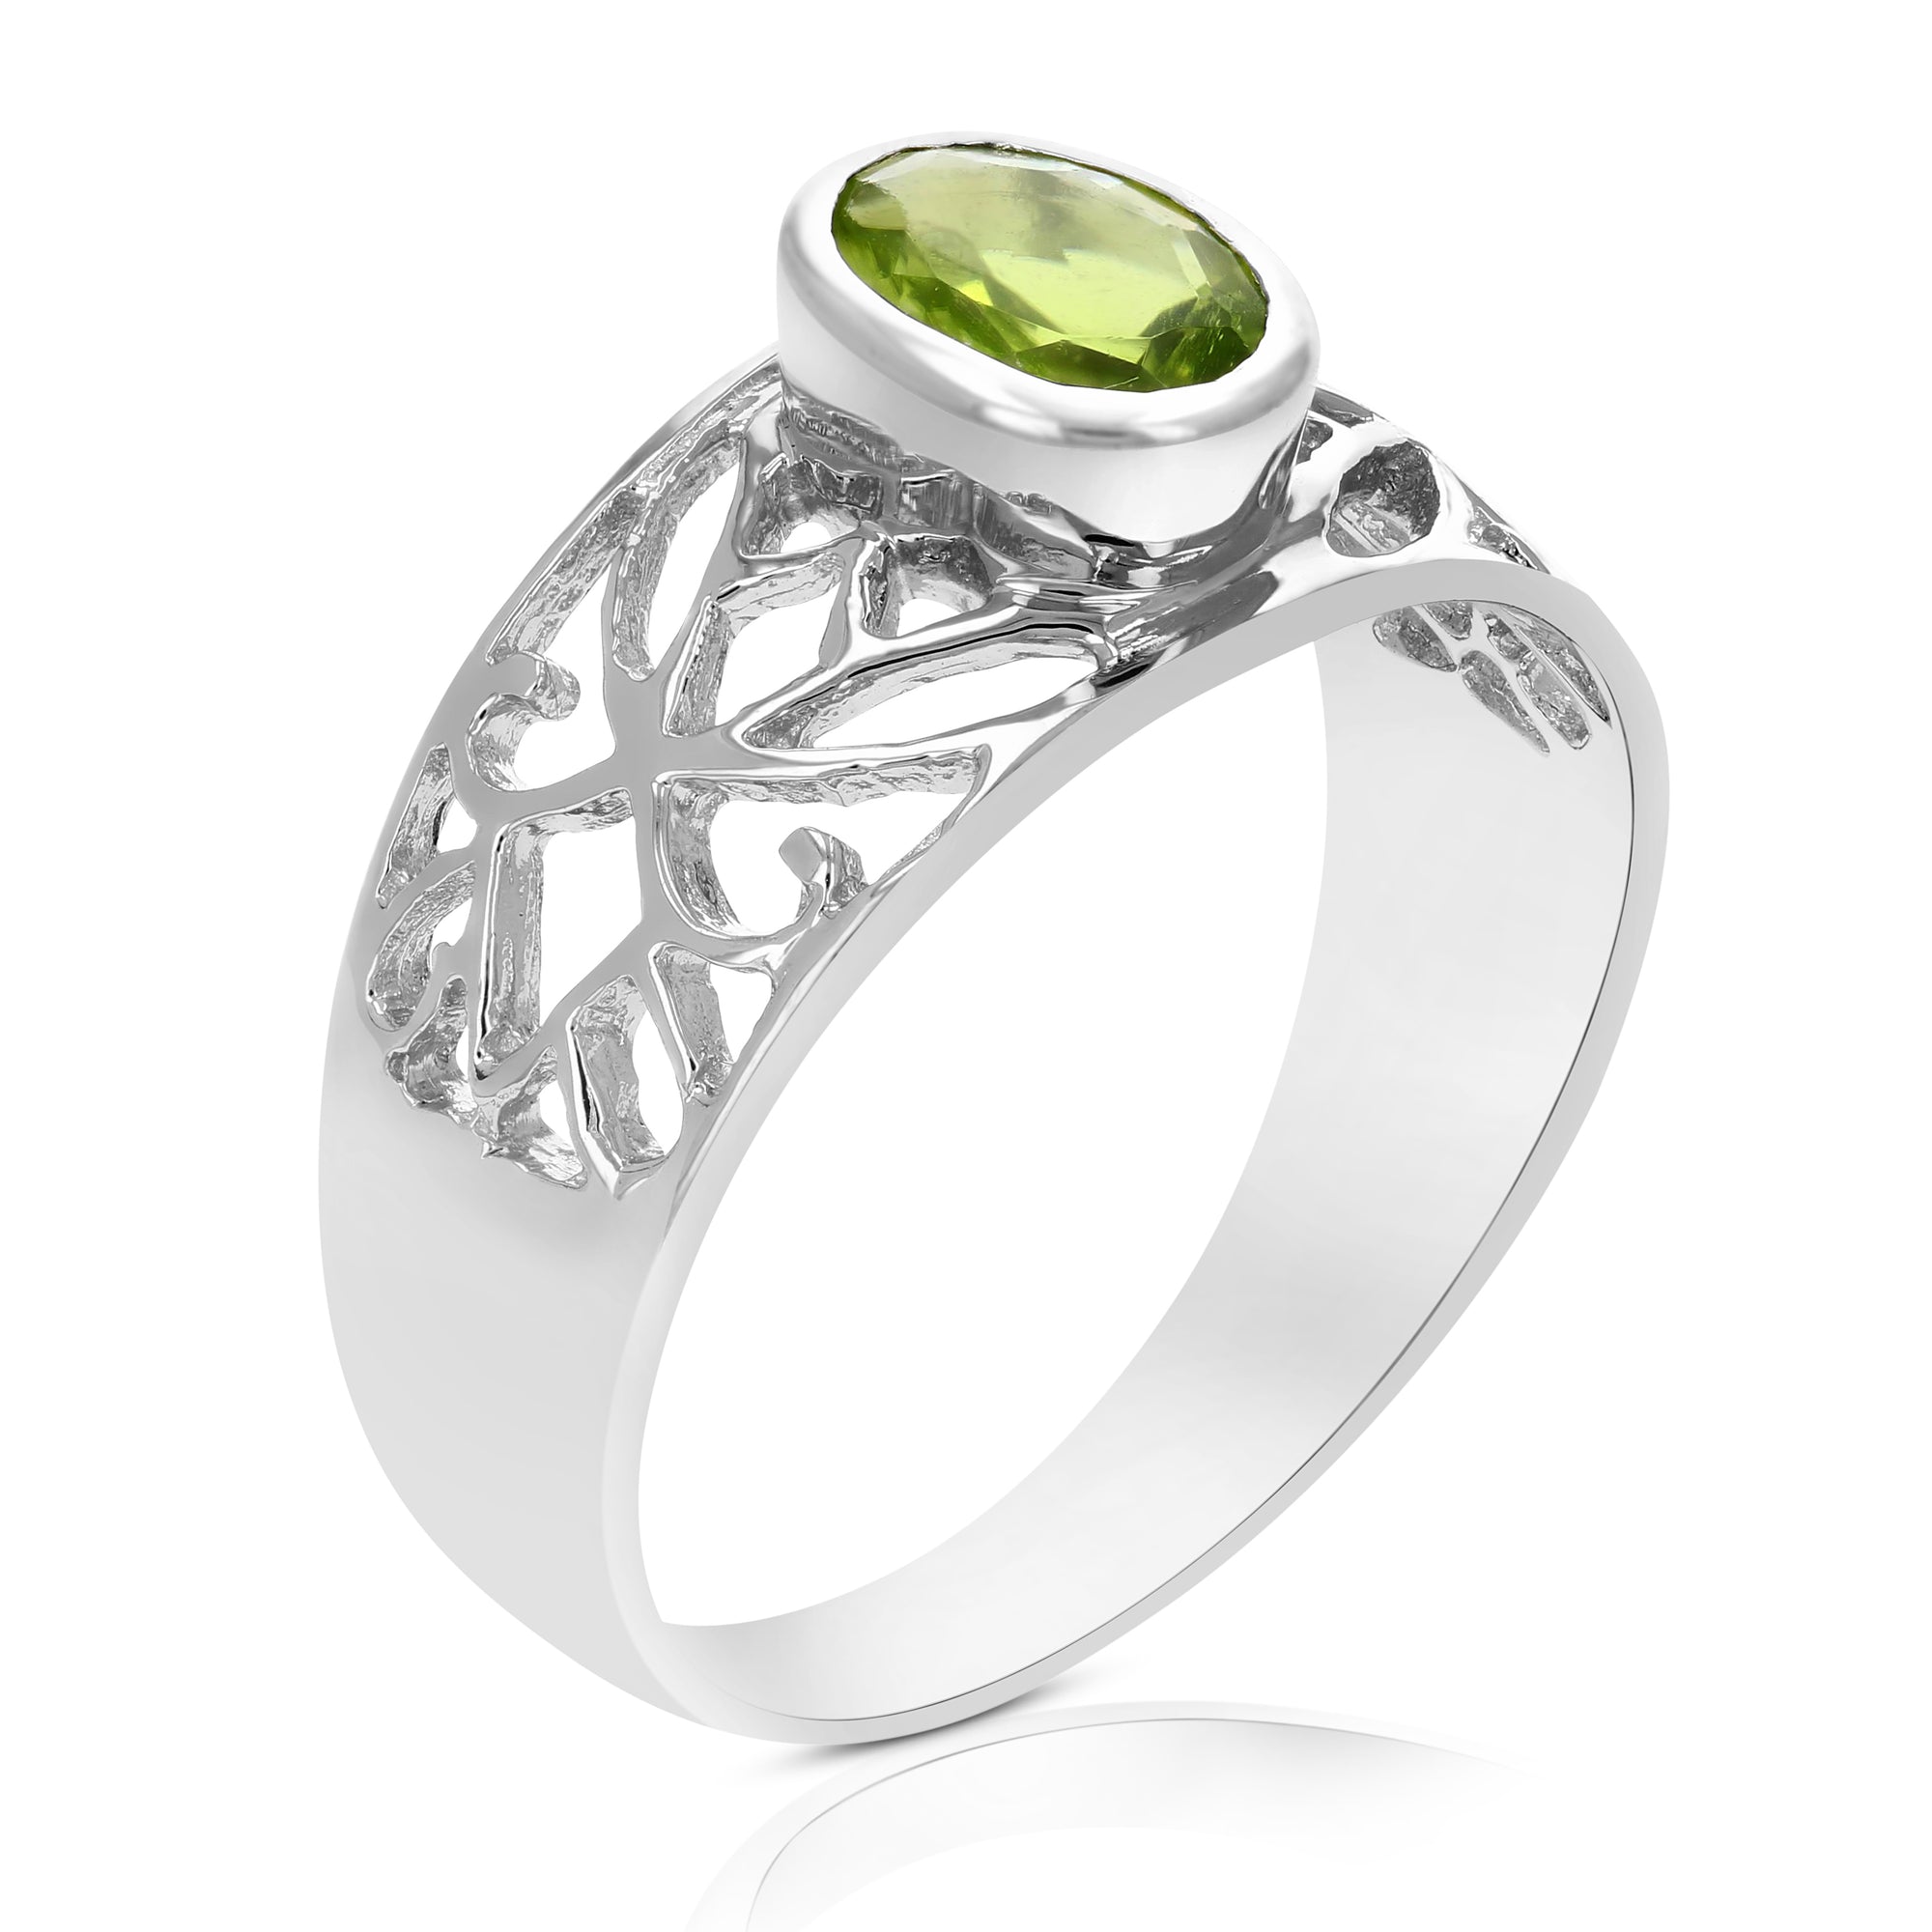 0.70 cttw Peridot Ring .925 Sterling Silver with Rhodium Oval Shape Filigree